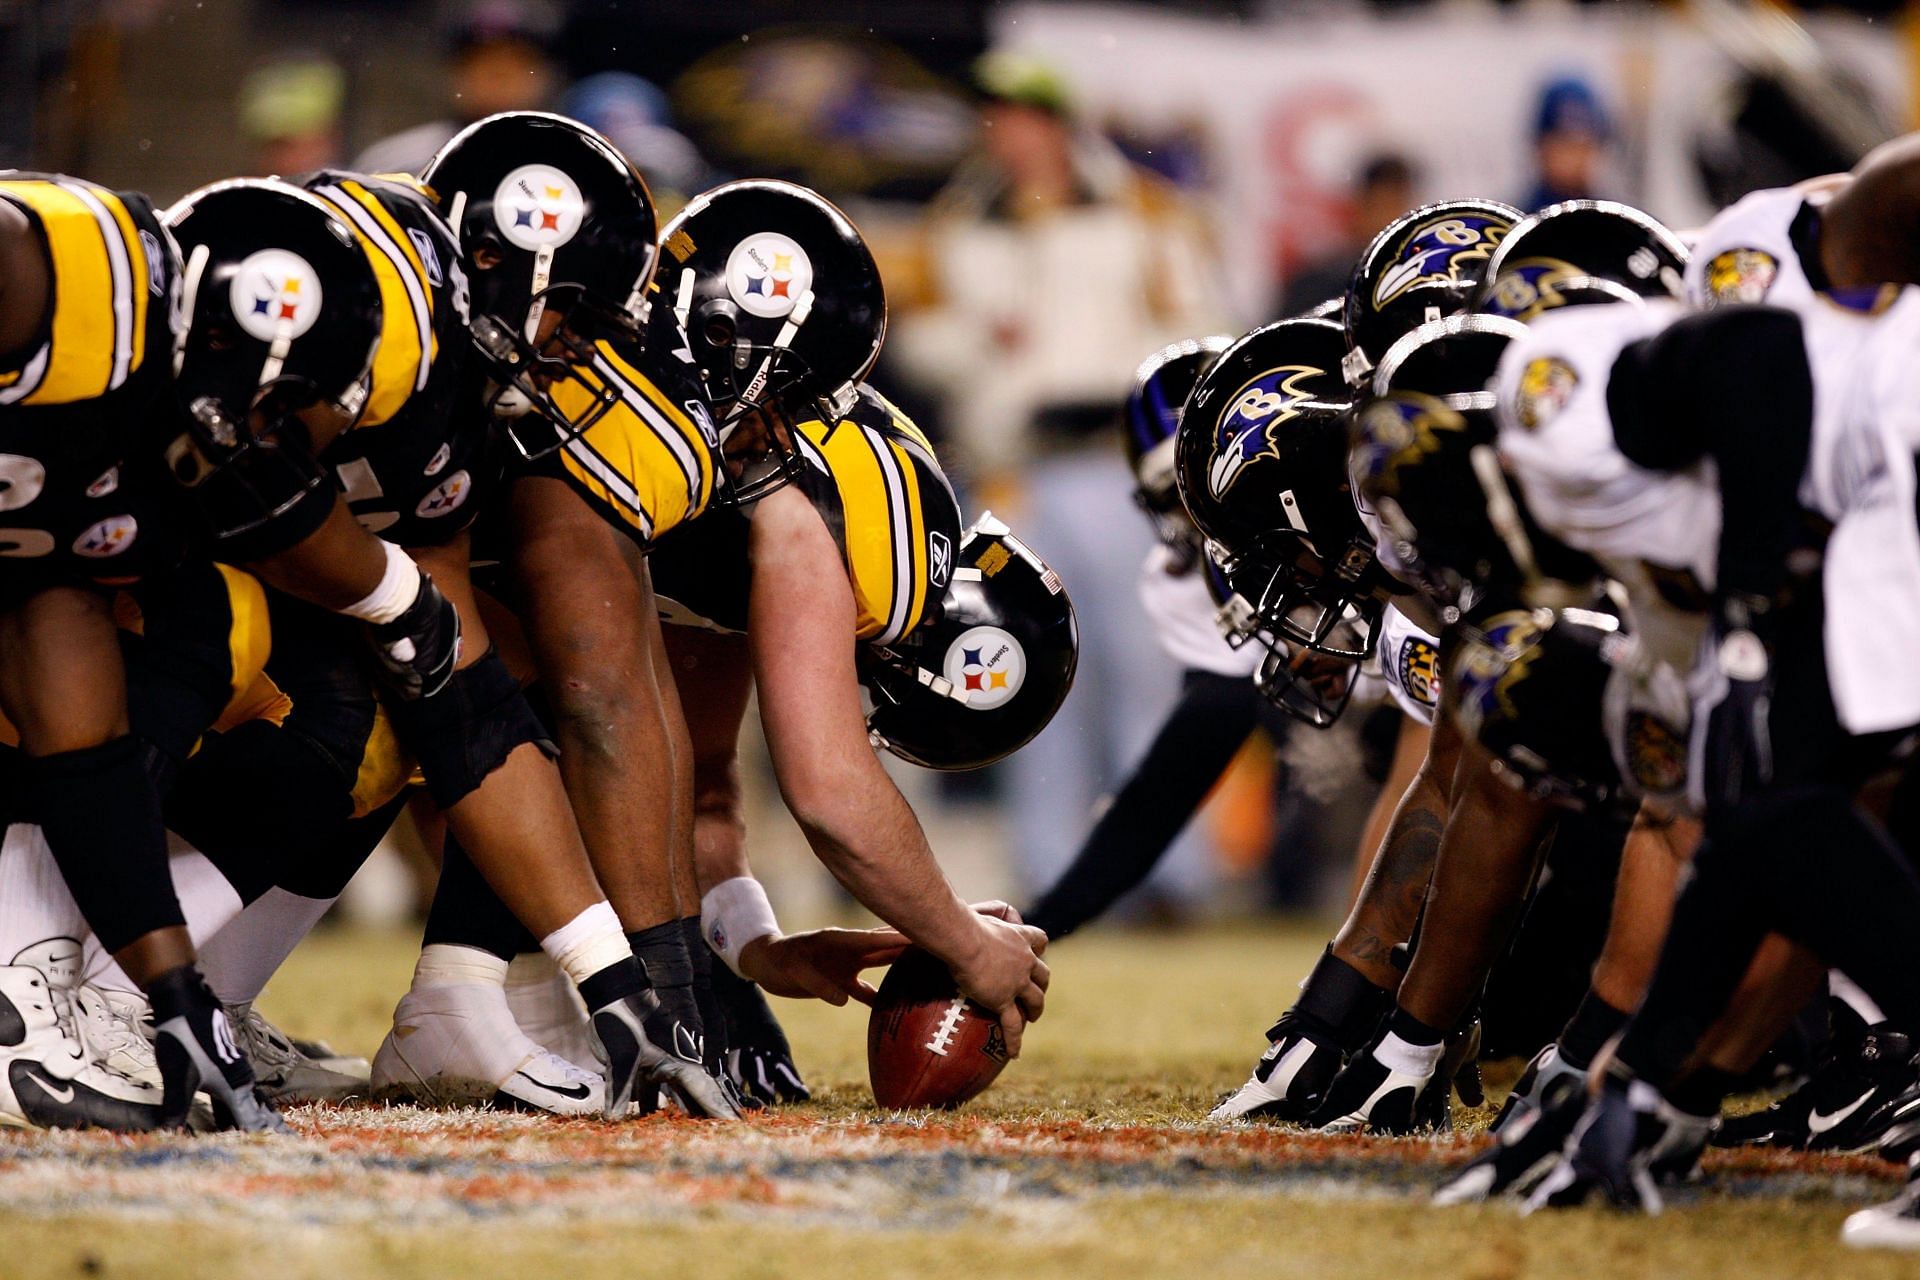 The Steelers and Ravens line up during the 2009 AFC title game (Photo: Getty)